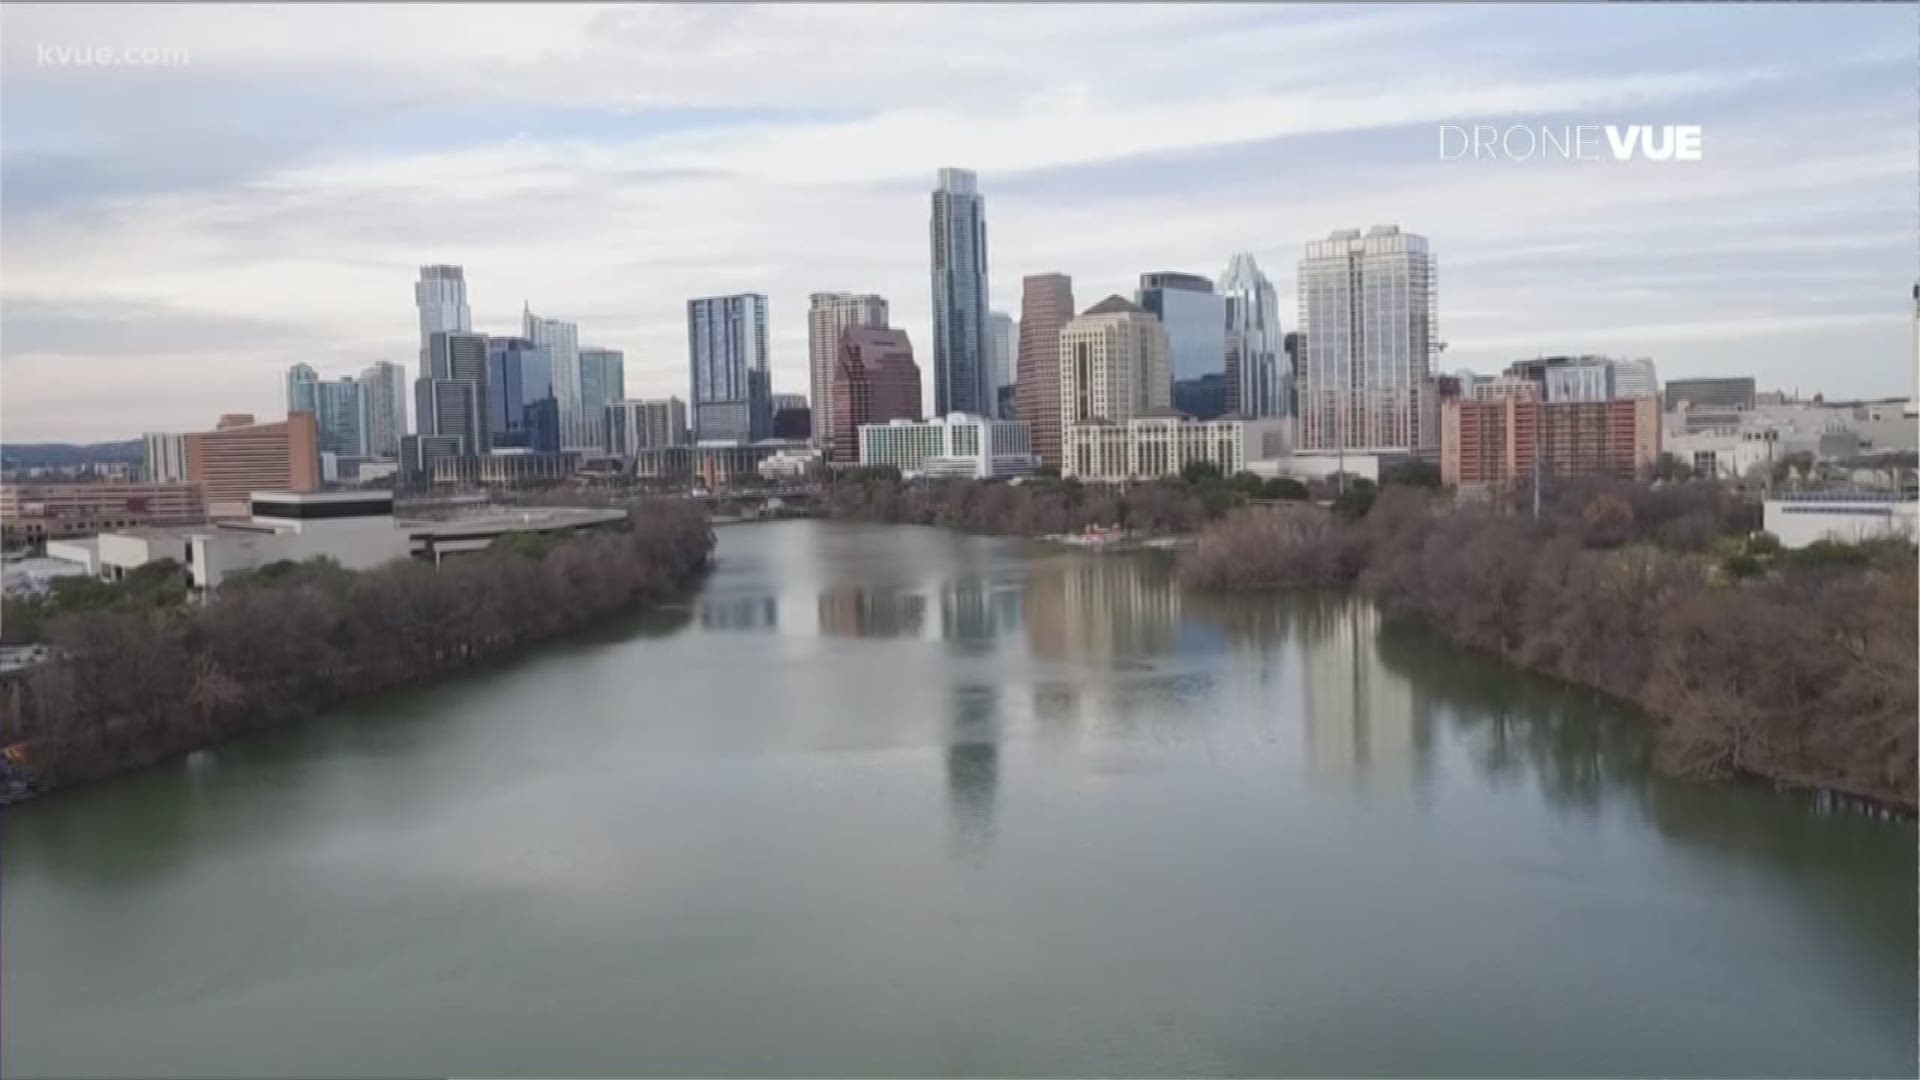 The City of Austin recently released results of a new survey, which found many believe there isn't enough affordable housing for low- to moderate-income families.